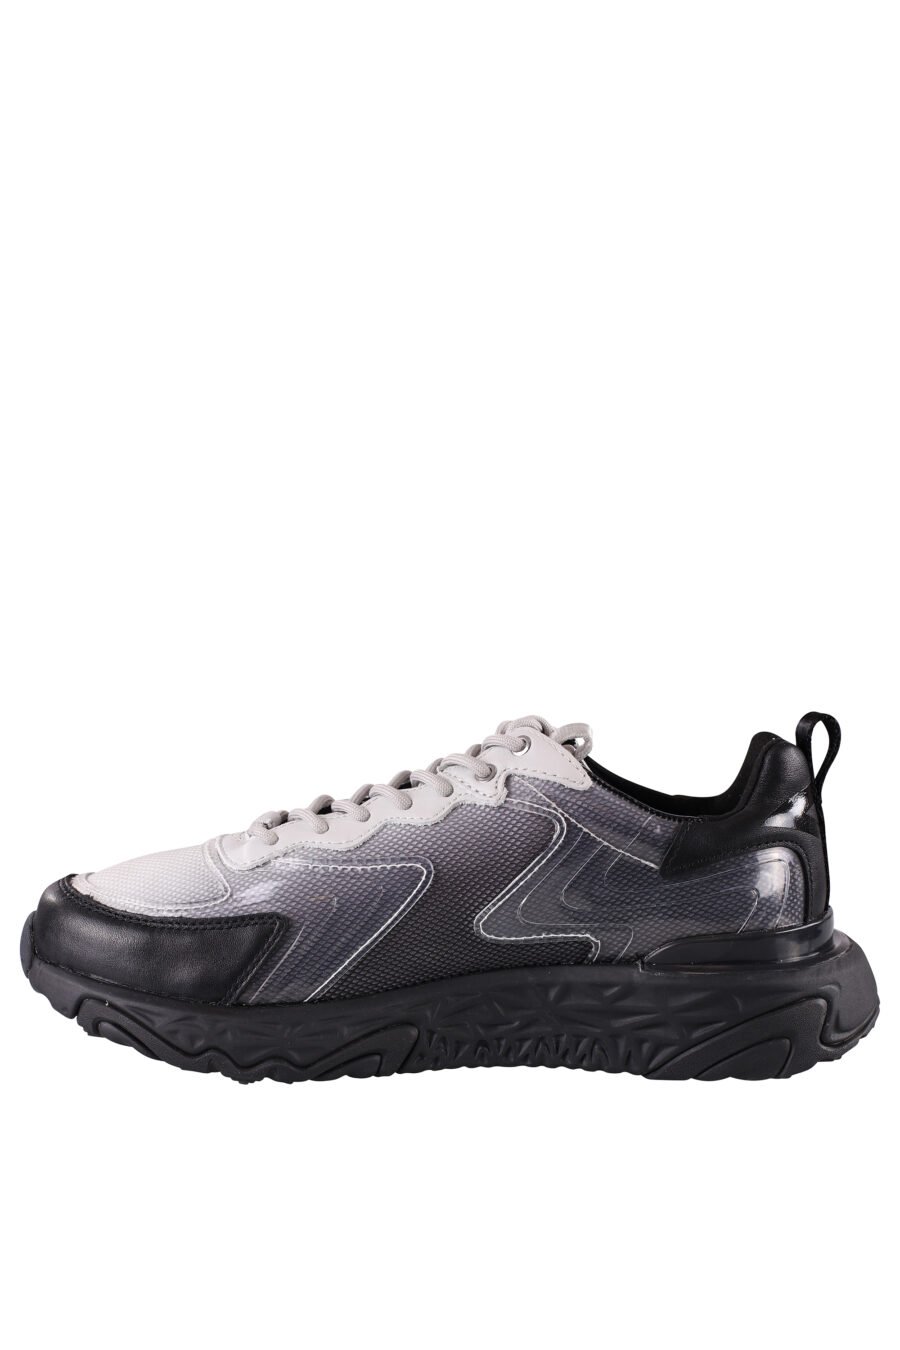 Black "blaze" trainers with white and transparent details - IMG 8480